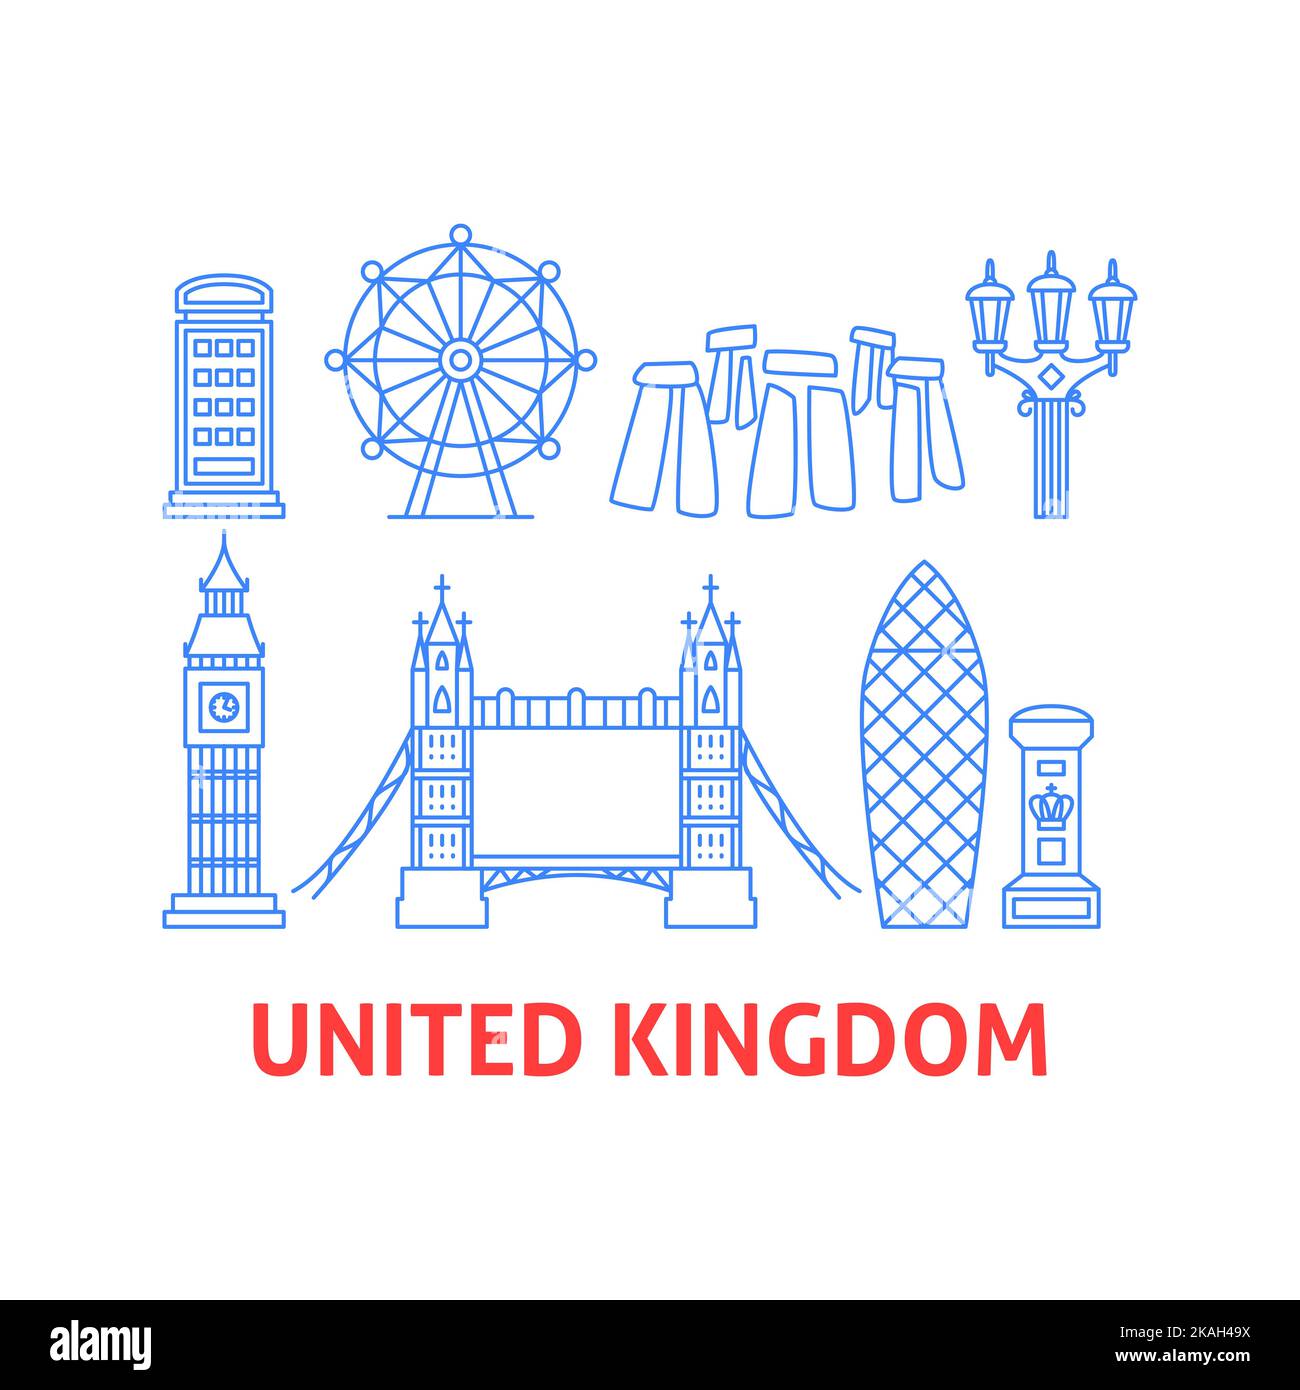 United Kingdom Line Objects Stock Vector